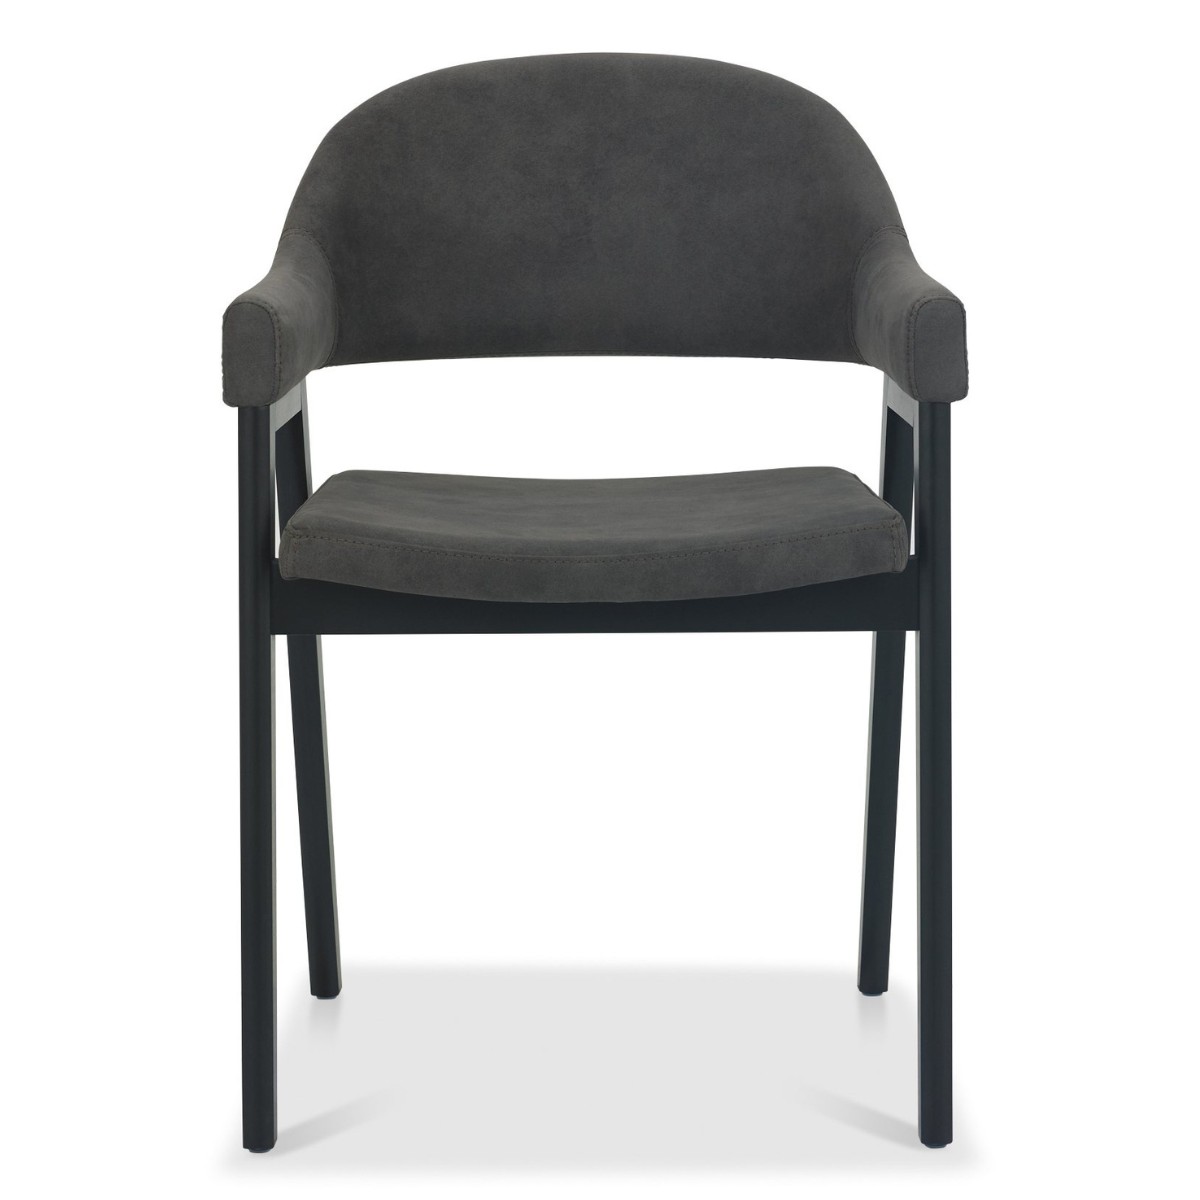 Chambery Weathered Oak Curved Back Dining Chair Grey- 2